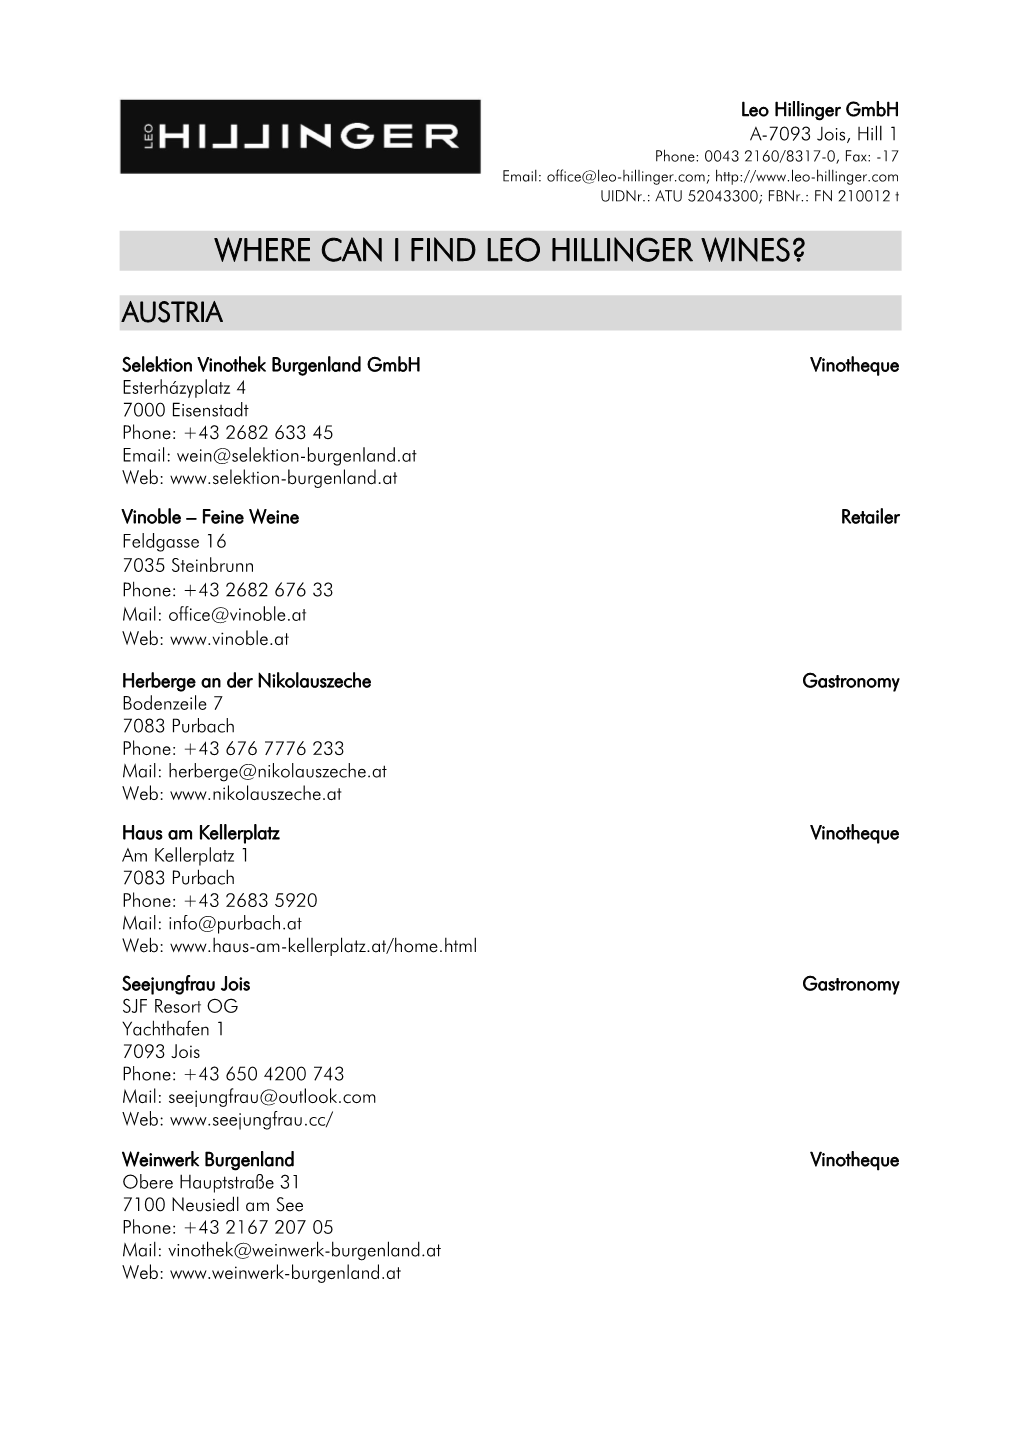 Where Can I Find Leo Hillinger Wines?